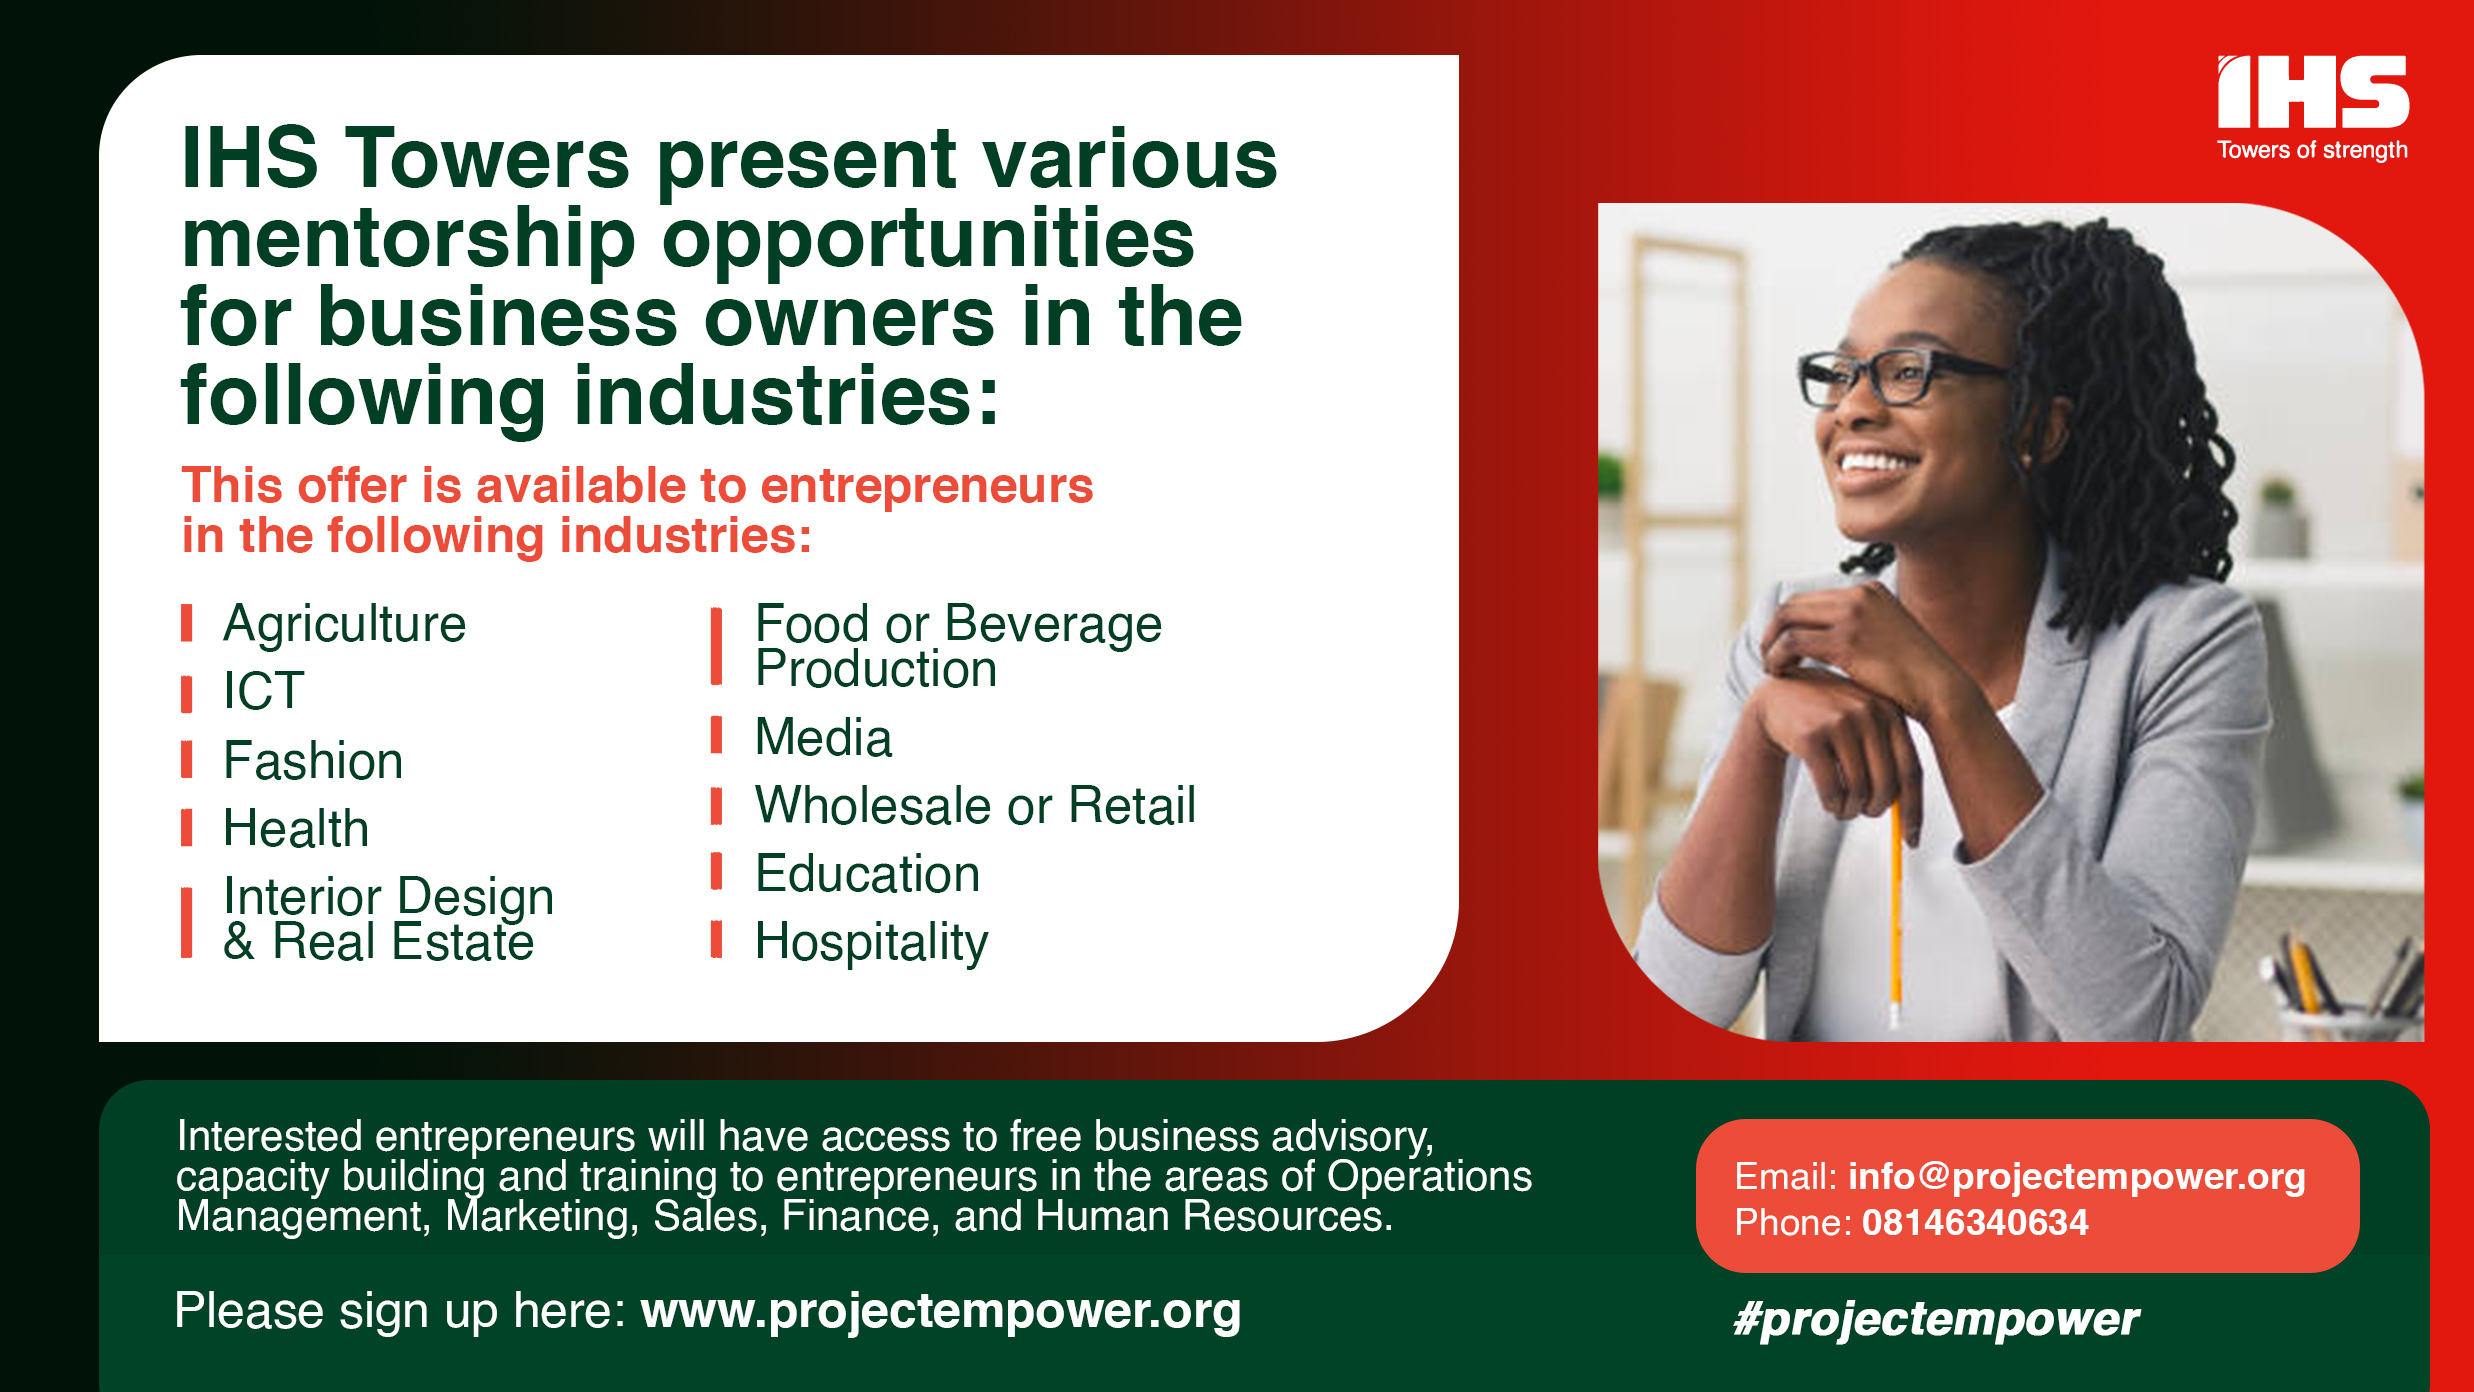 Project Empower Acceleration Programme